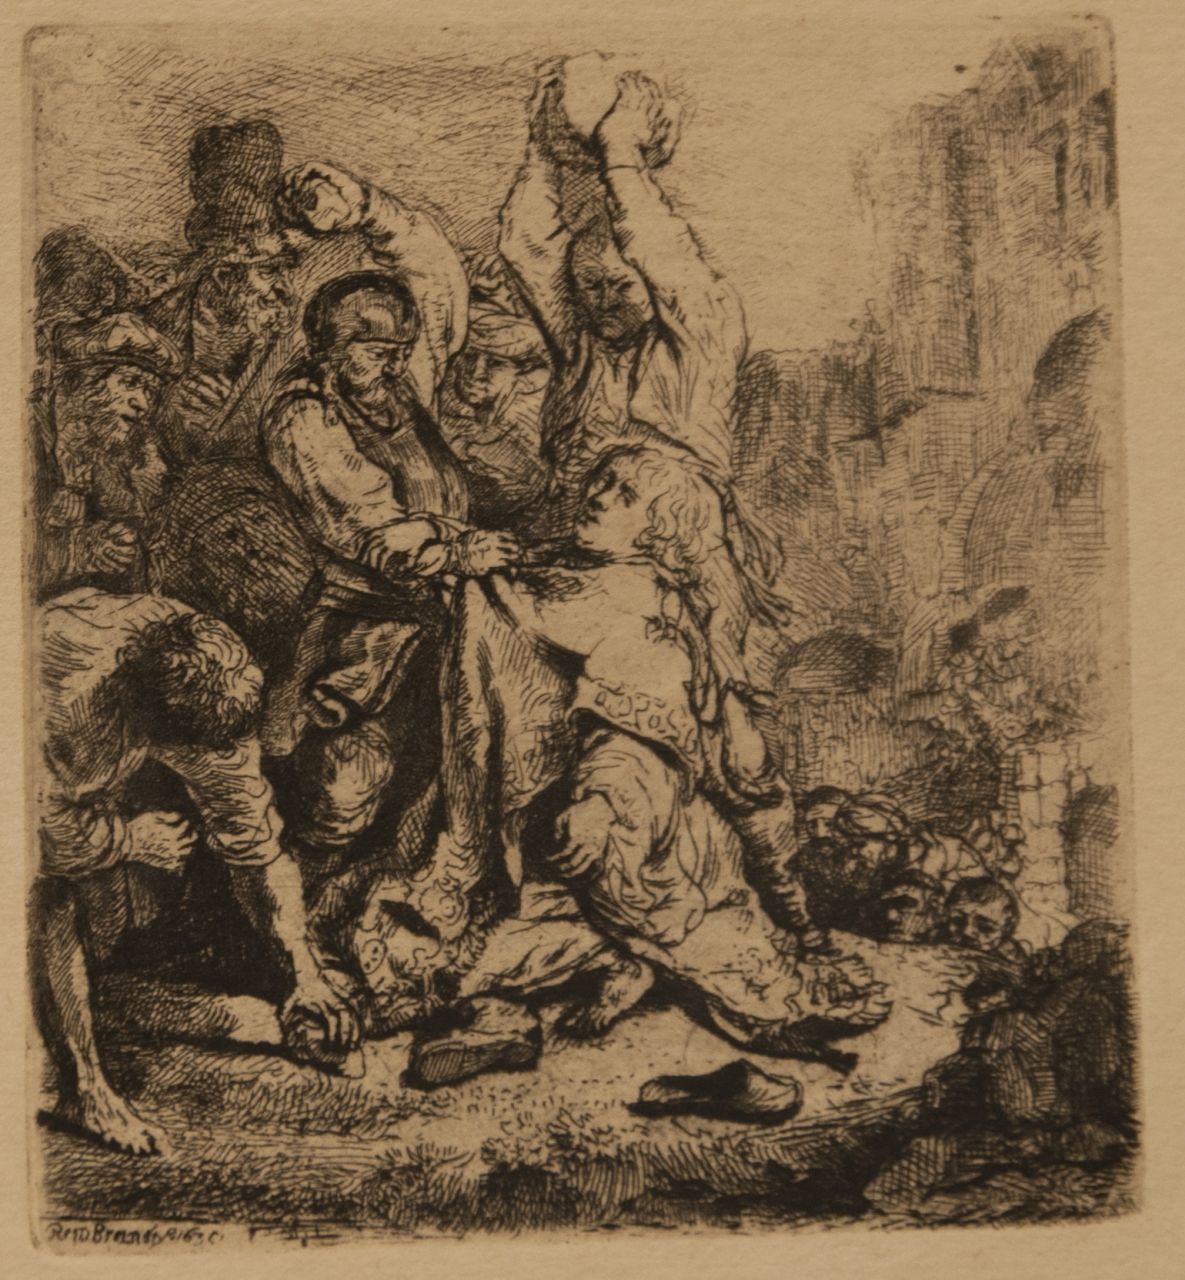 Rembrandt (Rembrandt Harmensz. van Rijn)   | Rembrandt (Rembrandt Harmensz. van Rijn), The stoning of St. Stephen, etching on paper 9.5 x 8.5 cm, signed l.l. in the plate and dated 1635 in the plate